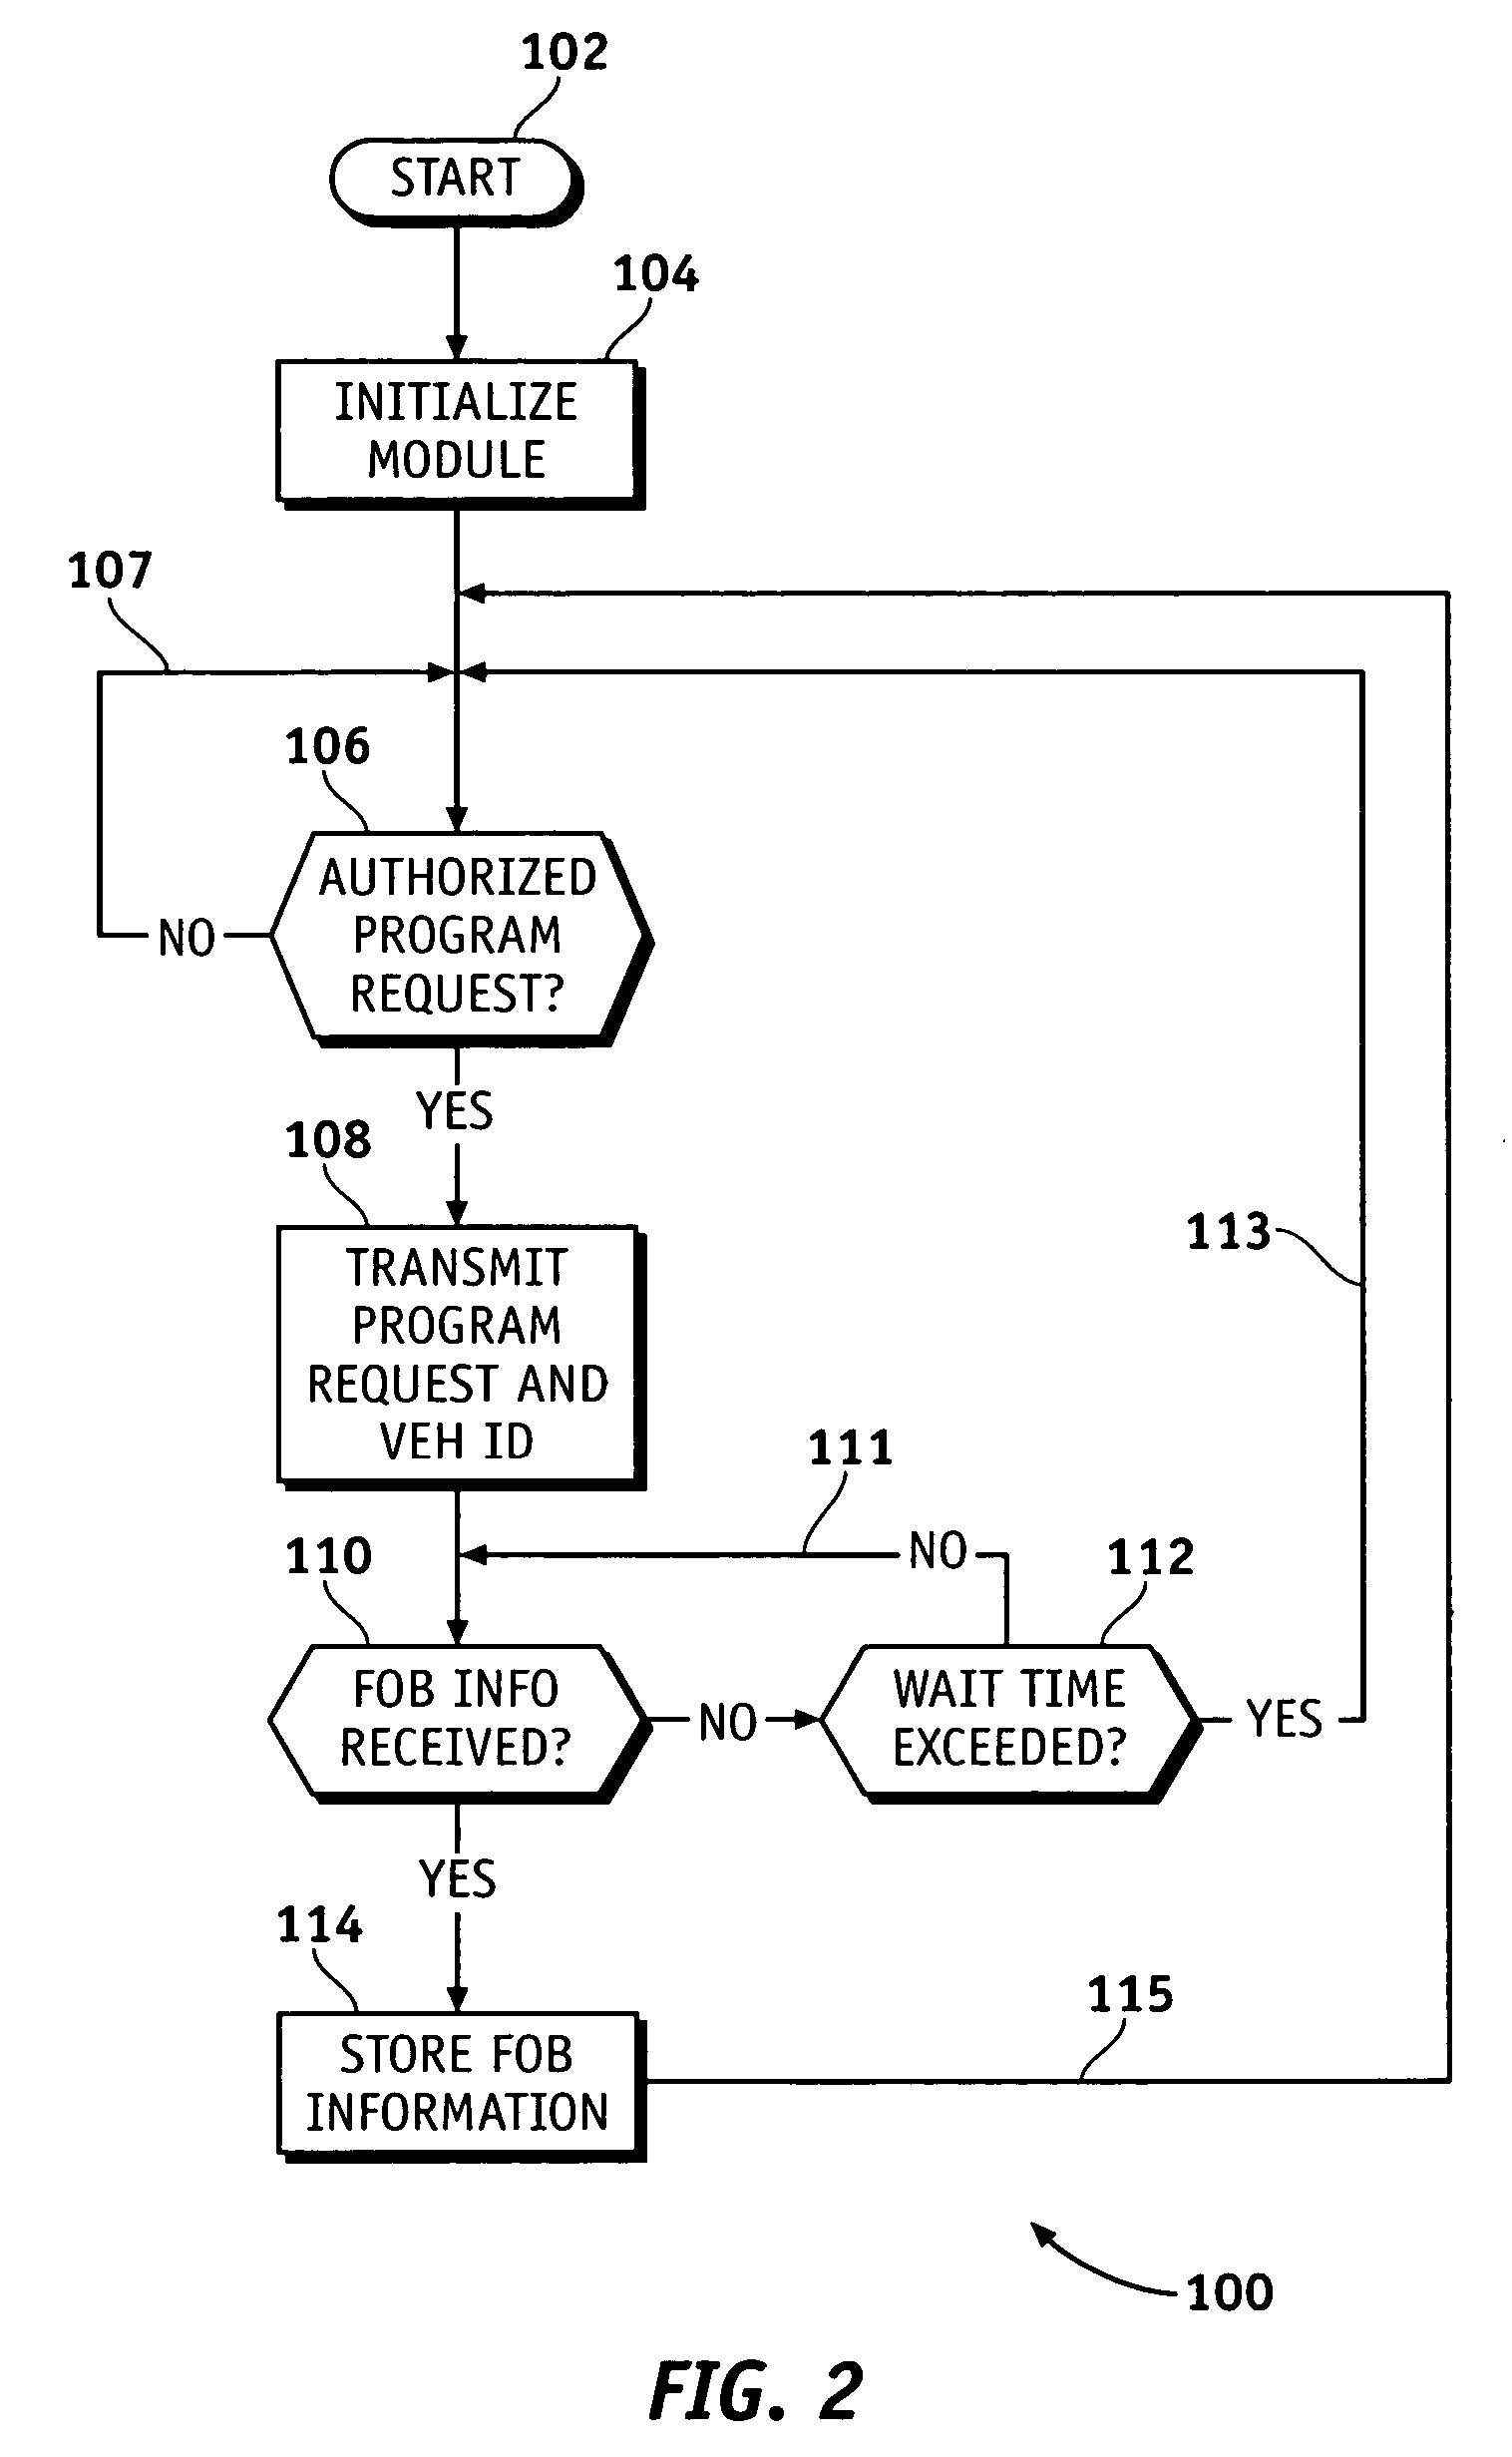 Multiple vehicle authentication for entry and starting systems